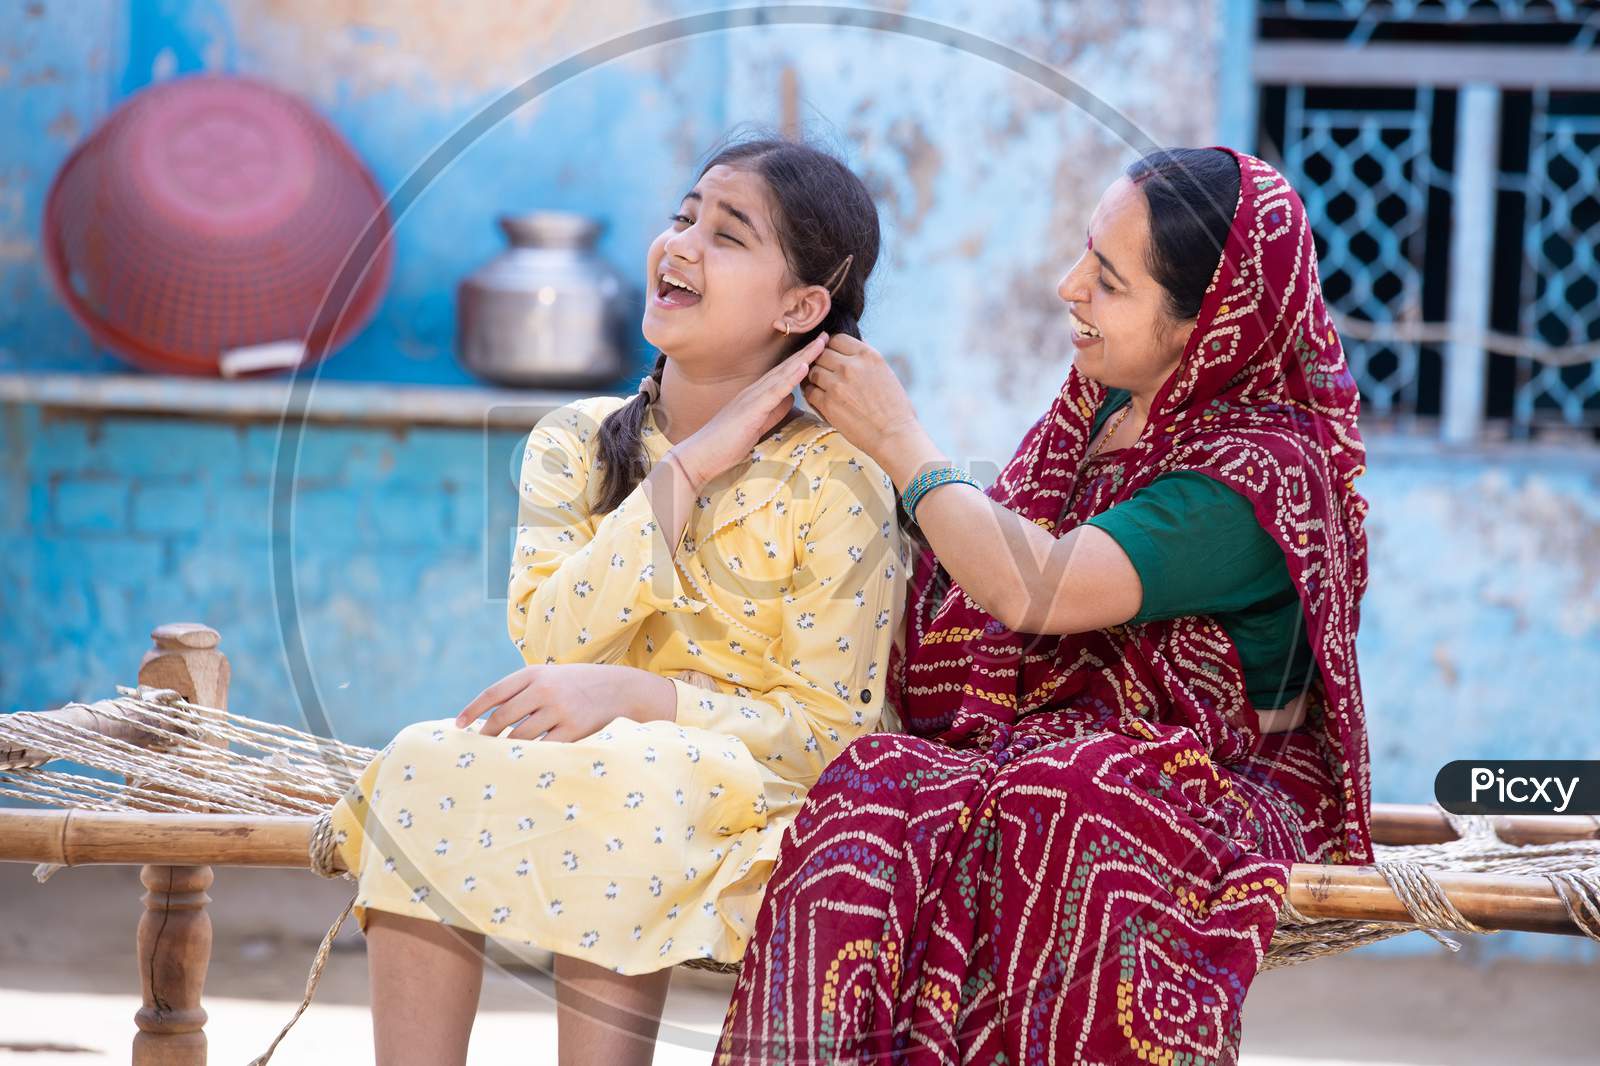 Rural Indian Mother Braids Hair Of Her Young Adorable Daughter, Cute Girl Feel Pain As Mum Getting Her Ready Sitting On Traditional Bed At Village Home. Both Spending Time Together.